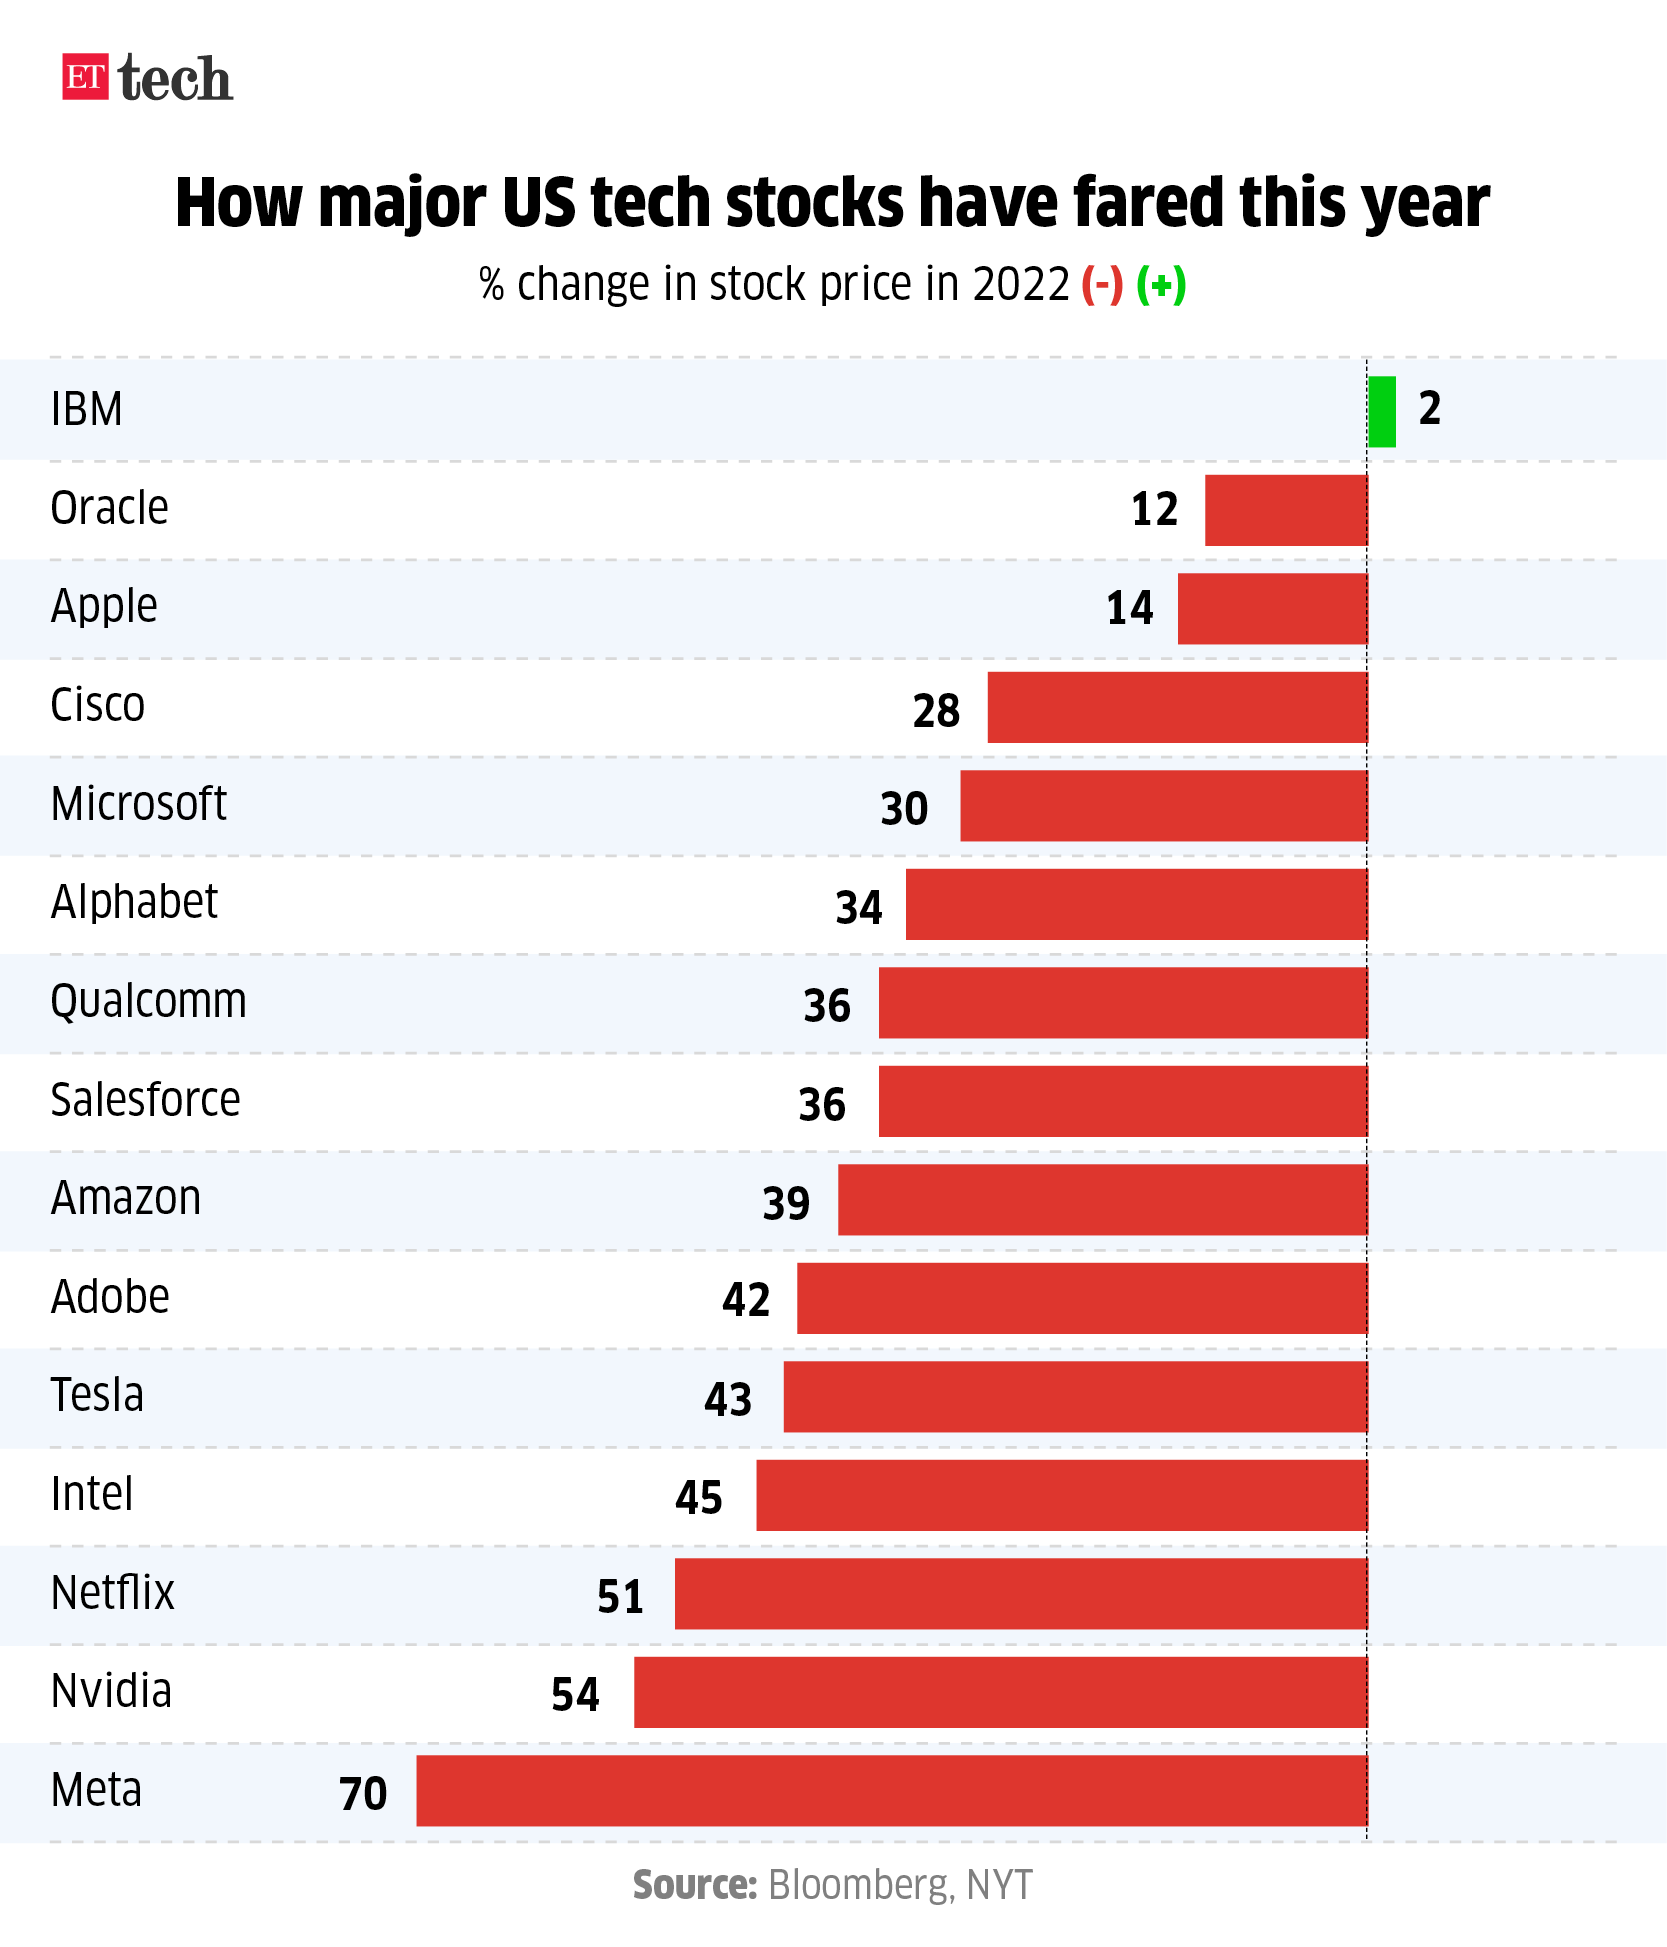 How major US tech stocks have fared this year